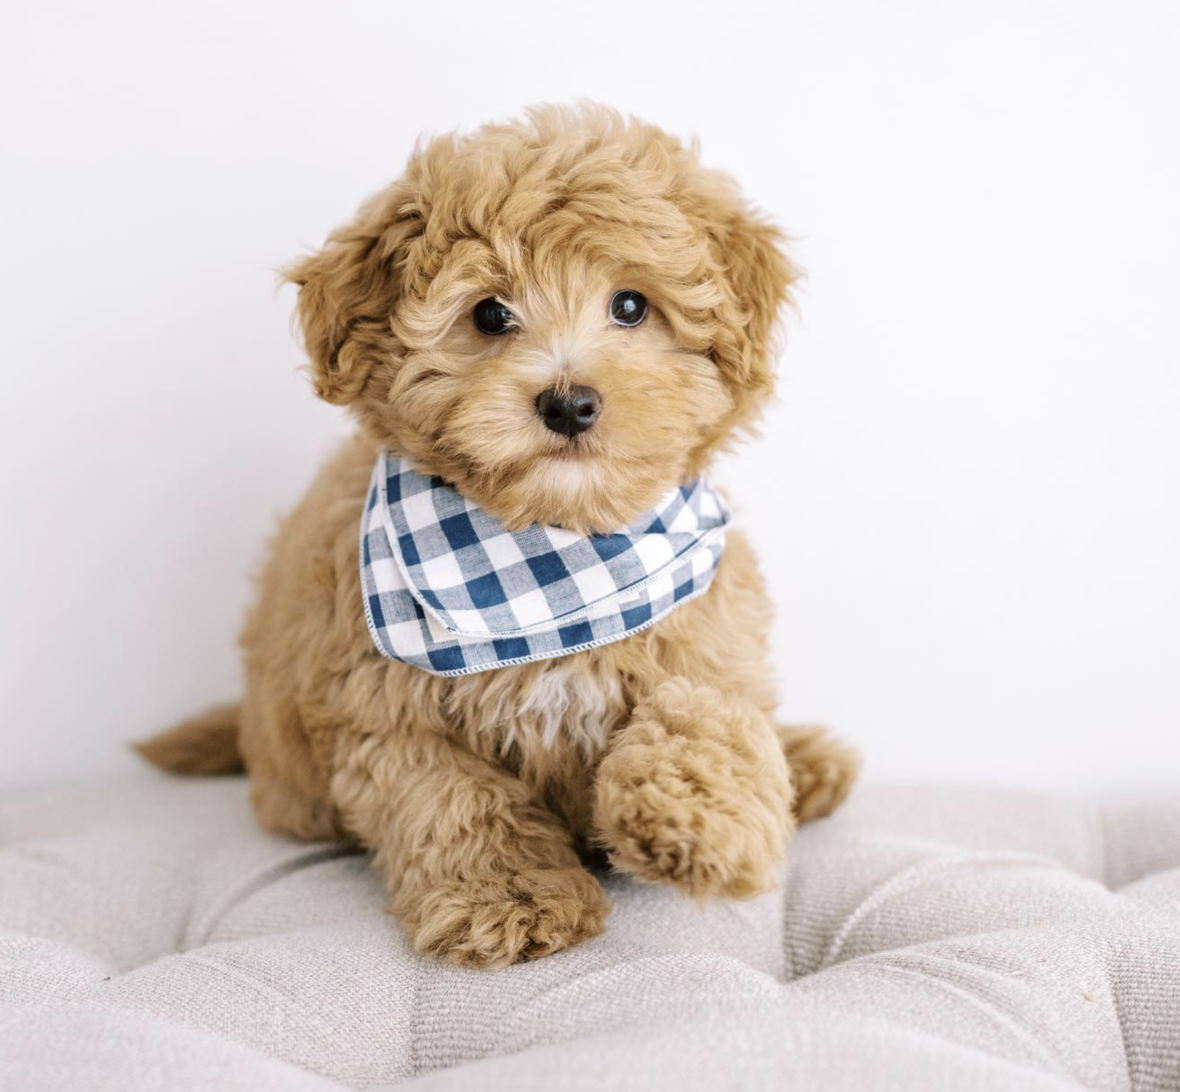 A micro goldendoodle